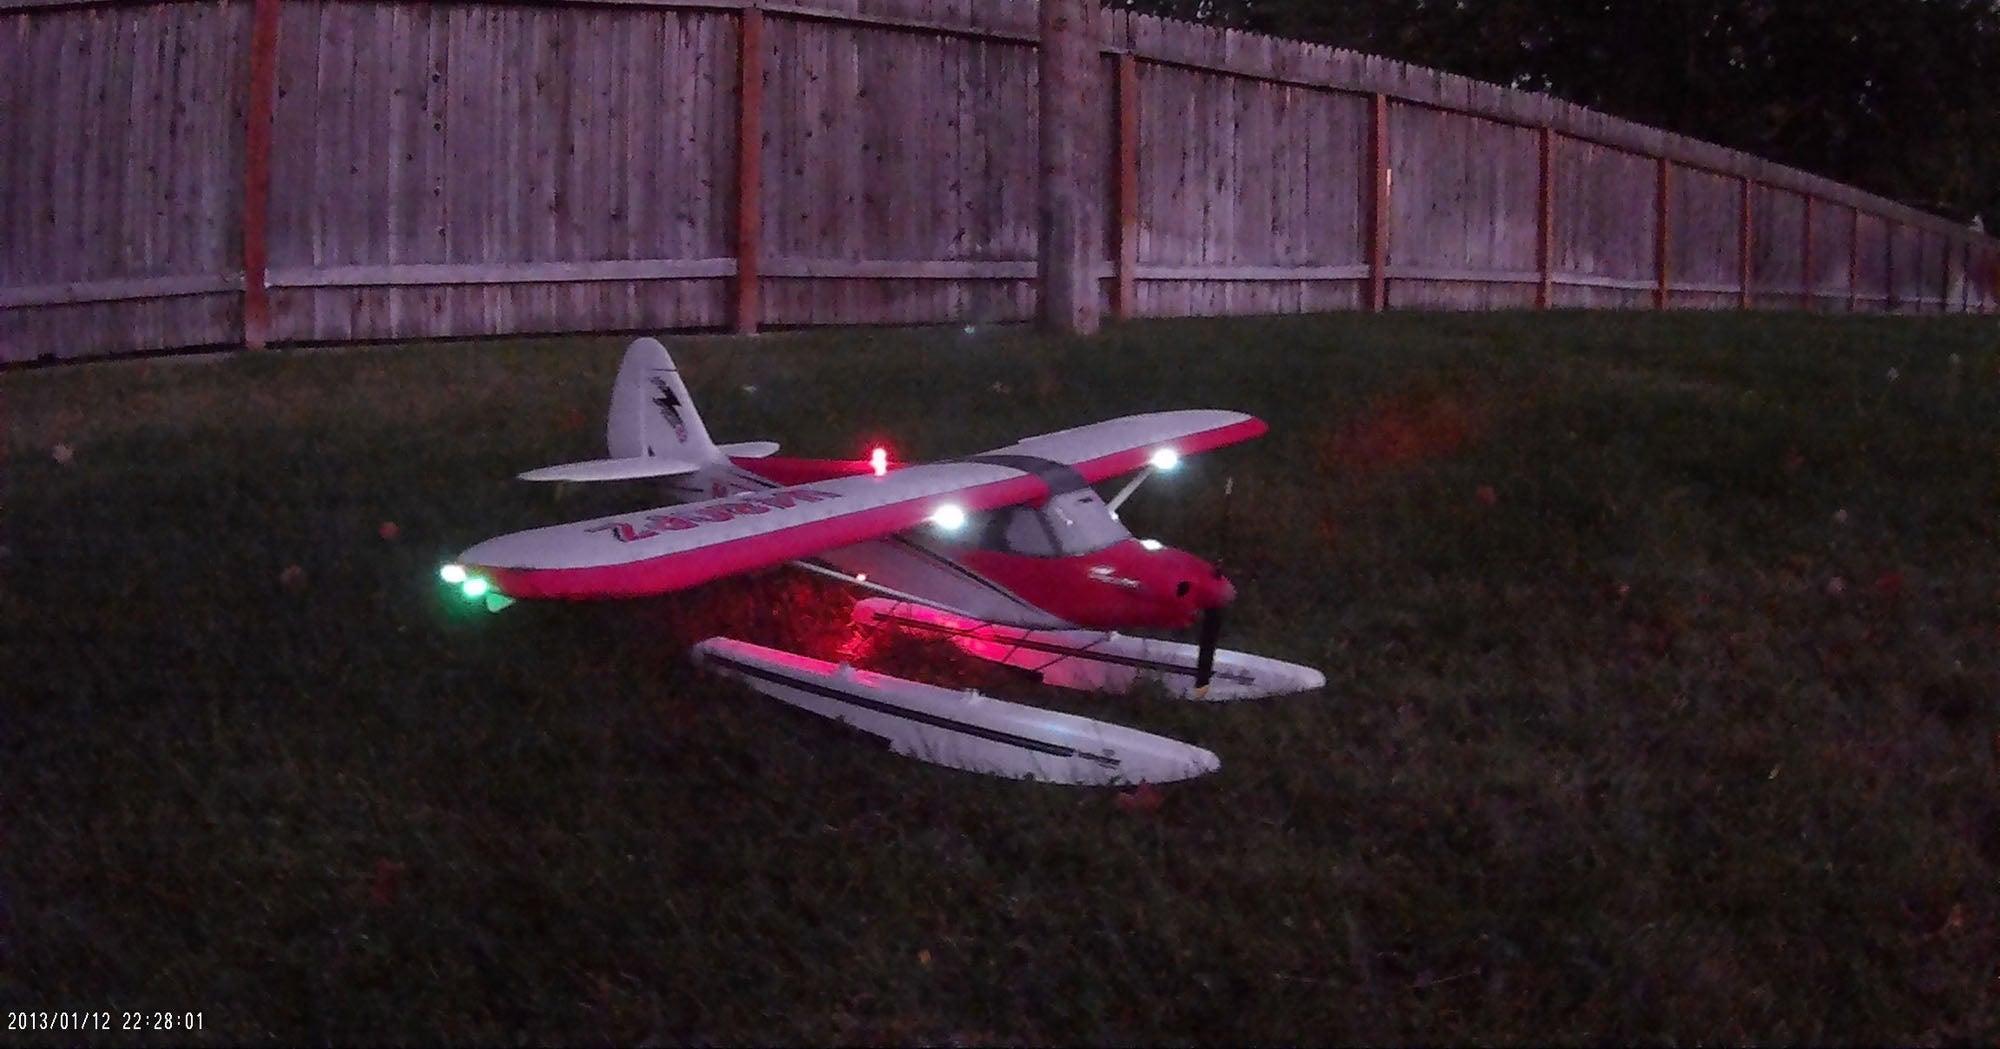 Rc Airplane With Lights: Benefits of Using RC Airplanes with Lights